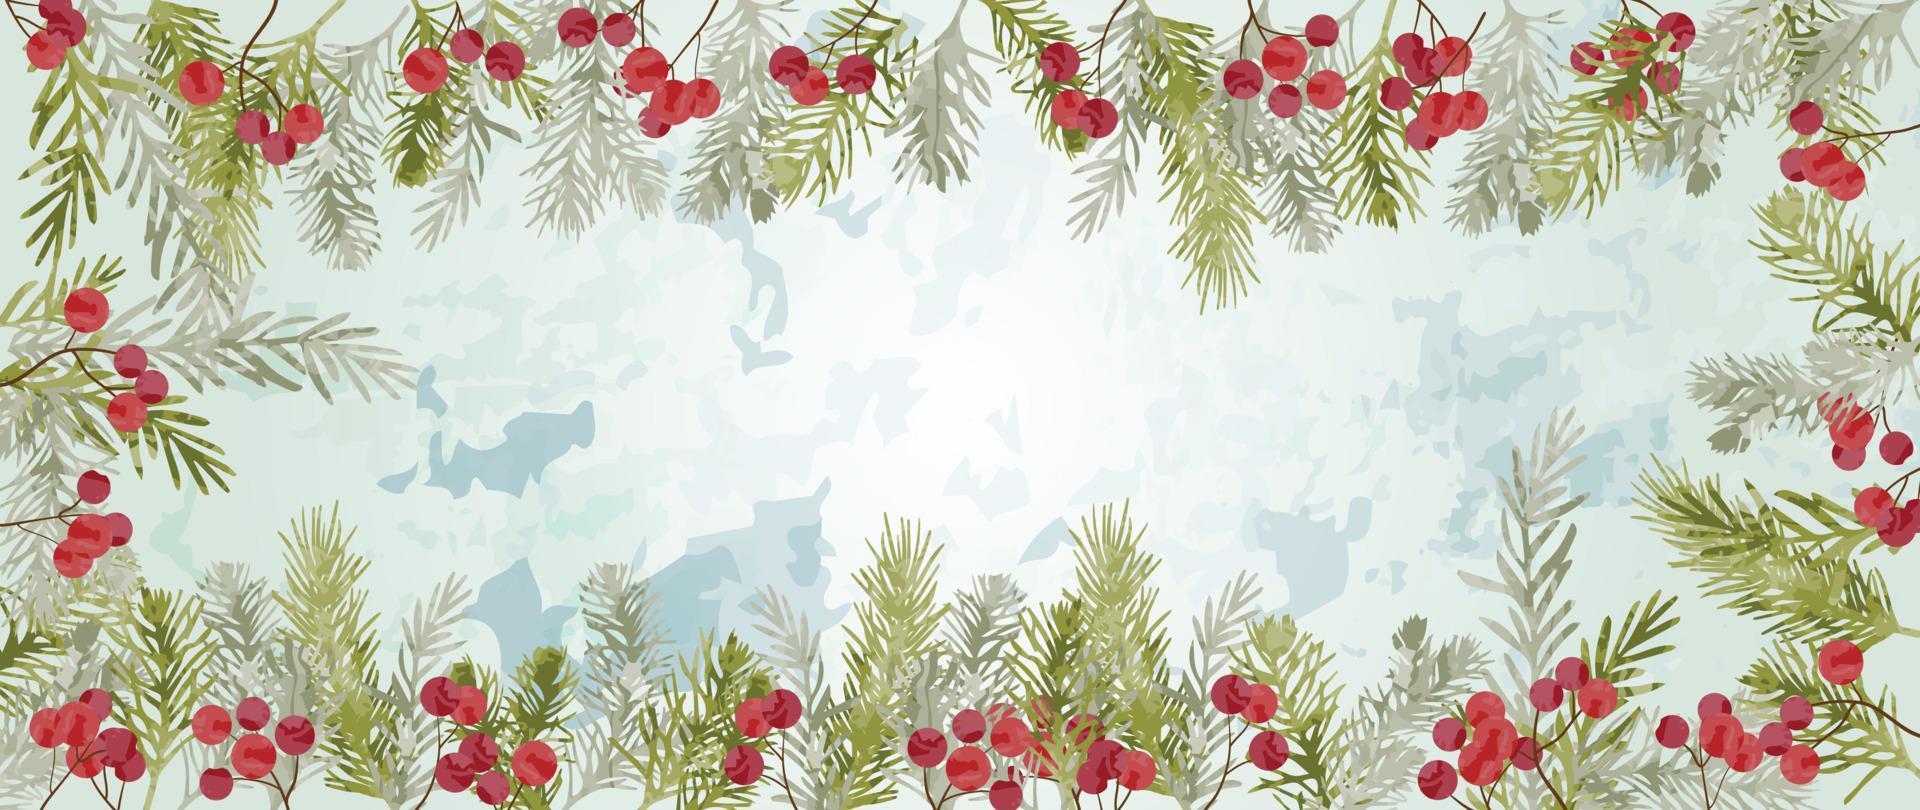 Christmas and watercolor abstract natural winter botanical leaves background vector. Decorative hand painted frame of pine leaves and berry. Design for wallpaper, cover, invitation card, poster. vector